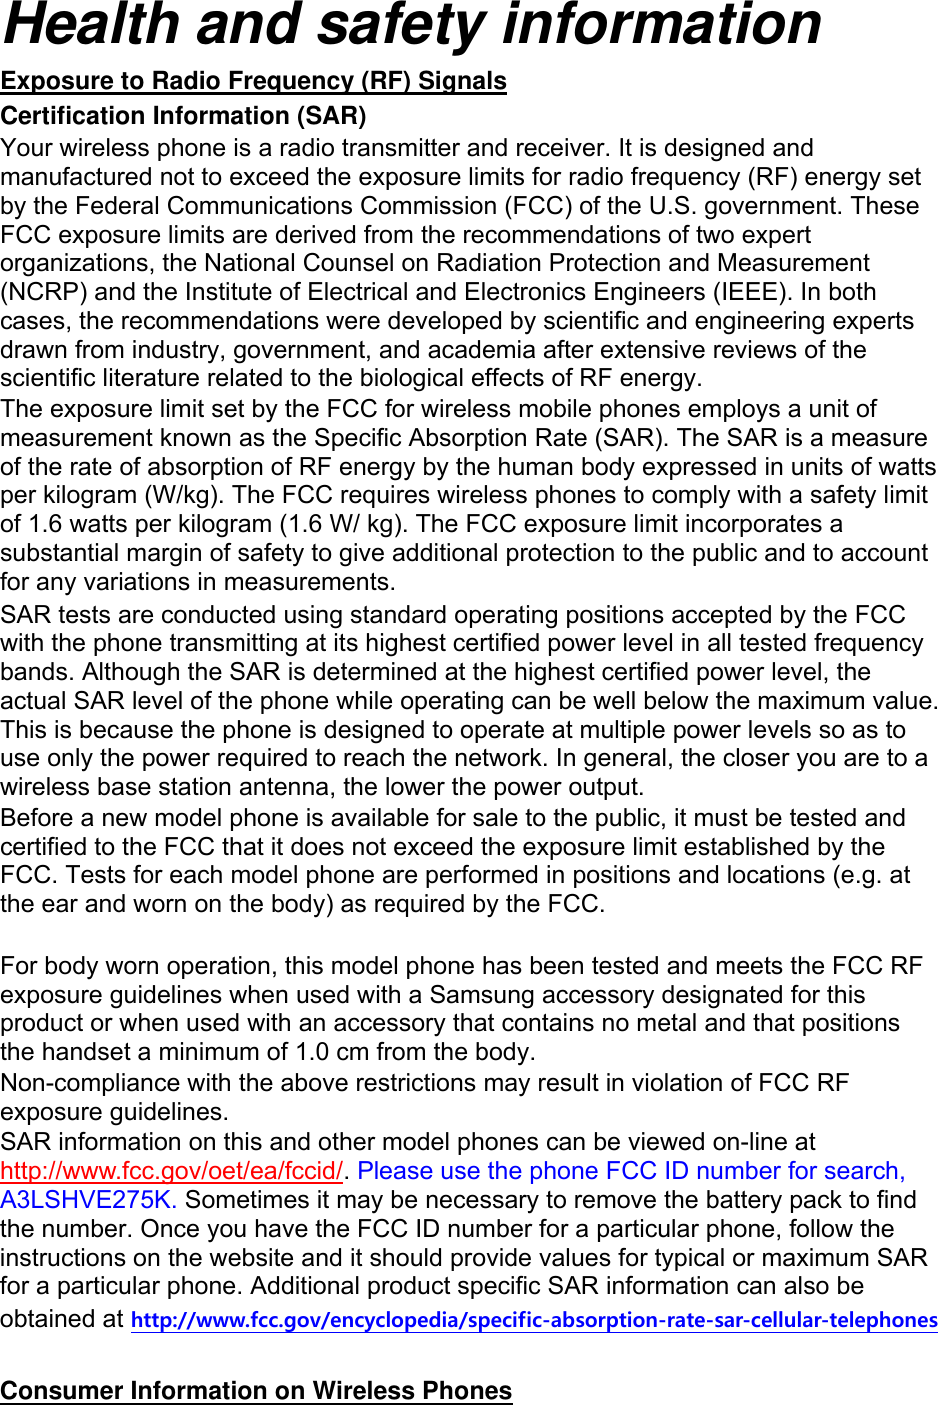 Health and safety information Exposure to Radio Frequency (RF) Signals Certification Information (SAR) Your wireless phone is a radio transmitter and receiver. It is designed and manufactured not to exceed the exposure limits for radio frequency (RF) energy set by the Federal Communications Commission (FCC) of the U.S. government. These FCC exposure limits are derived from the recommendations of two expert organizations, the National Counsel on Radiation Protection and Measurement (NCRP) and the Institute of Electrical and Electronics Engineers (IEEE). In both cases, the recommendations were developed by scientific and engineering experts drawn from industry, government, and academia after extensive reviews of the scientific literature related to the biological effects of RF energy. The exposure limit set by the FCC for wireless mobile phones employs a unit of measurement known as the Specific Absorption Rate (SAR). The SAR is a measure of the rate of absorption of RF energy by the human body expressed in units of watts per kilogram (W/kg). The FCC requires wireless phones to comply with a safety limit of 1.6 watts per kilogram (1.6 W/ kg). The FCC exposure limit incorporates a substantial margin of safety to give additional protection to the public and to account for any variations in measurements. SAR tests are conducted using standard operating positions accepted by the FCC with the phone transmitting at its highest certified power level in all tested frequency bands. Although the SAR is determined at the highest certified power level, the actual SAR level of the phone while operating can be well below the maximum value. This is because the phone is designed to operate at multiple power levels so as to use only the power required to reach the network. In general, the closer you are to a wireless base station antenna, the lower the power output. Before a new model phone is available for sale to the public, it must be tested and certified to the FCC that it does not exceed the exposure limit established by the FCC. Tests for each model phone are performed in positions and locations (e.g. at the ear and worn on the body) as required by the FCC.      For body worn operation, this model phone has been tested and meets the FCC RF exposure guidelines when used with a Samsung accessory designated for this product or when used with an accessory that contains no metal and that positions the handset a minimum of 1.0 cm from the body.   Non-compliance with the above restrictions may result in violation of FCC RF exposure guidelines. SAR information on this and other model phones can be viewed on-line at http://www.fcc.gov/oet/ea/fccid/. Please use the phone FCC ID number for search, A3LSHVE275K. Sometimes it may be necessary to remove the battery pack to find the number. Once you have the FCC ID number for a particular phone, follow the instructions on the website and it should provide values for typical or maximum SAR for a particular phone. Additional product specific SAR information can also be obtained at http://www.fcc.gov/encyclopedia/specific-absorption-rate-sar-cellular-telephones  Consumer Information on Wireless Phones 